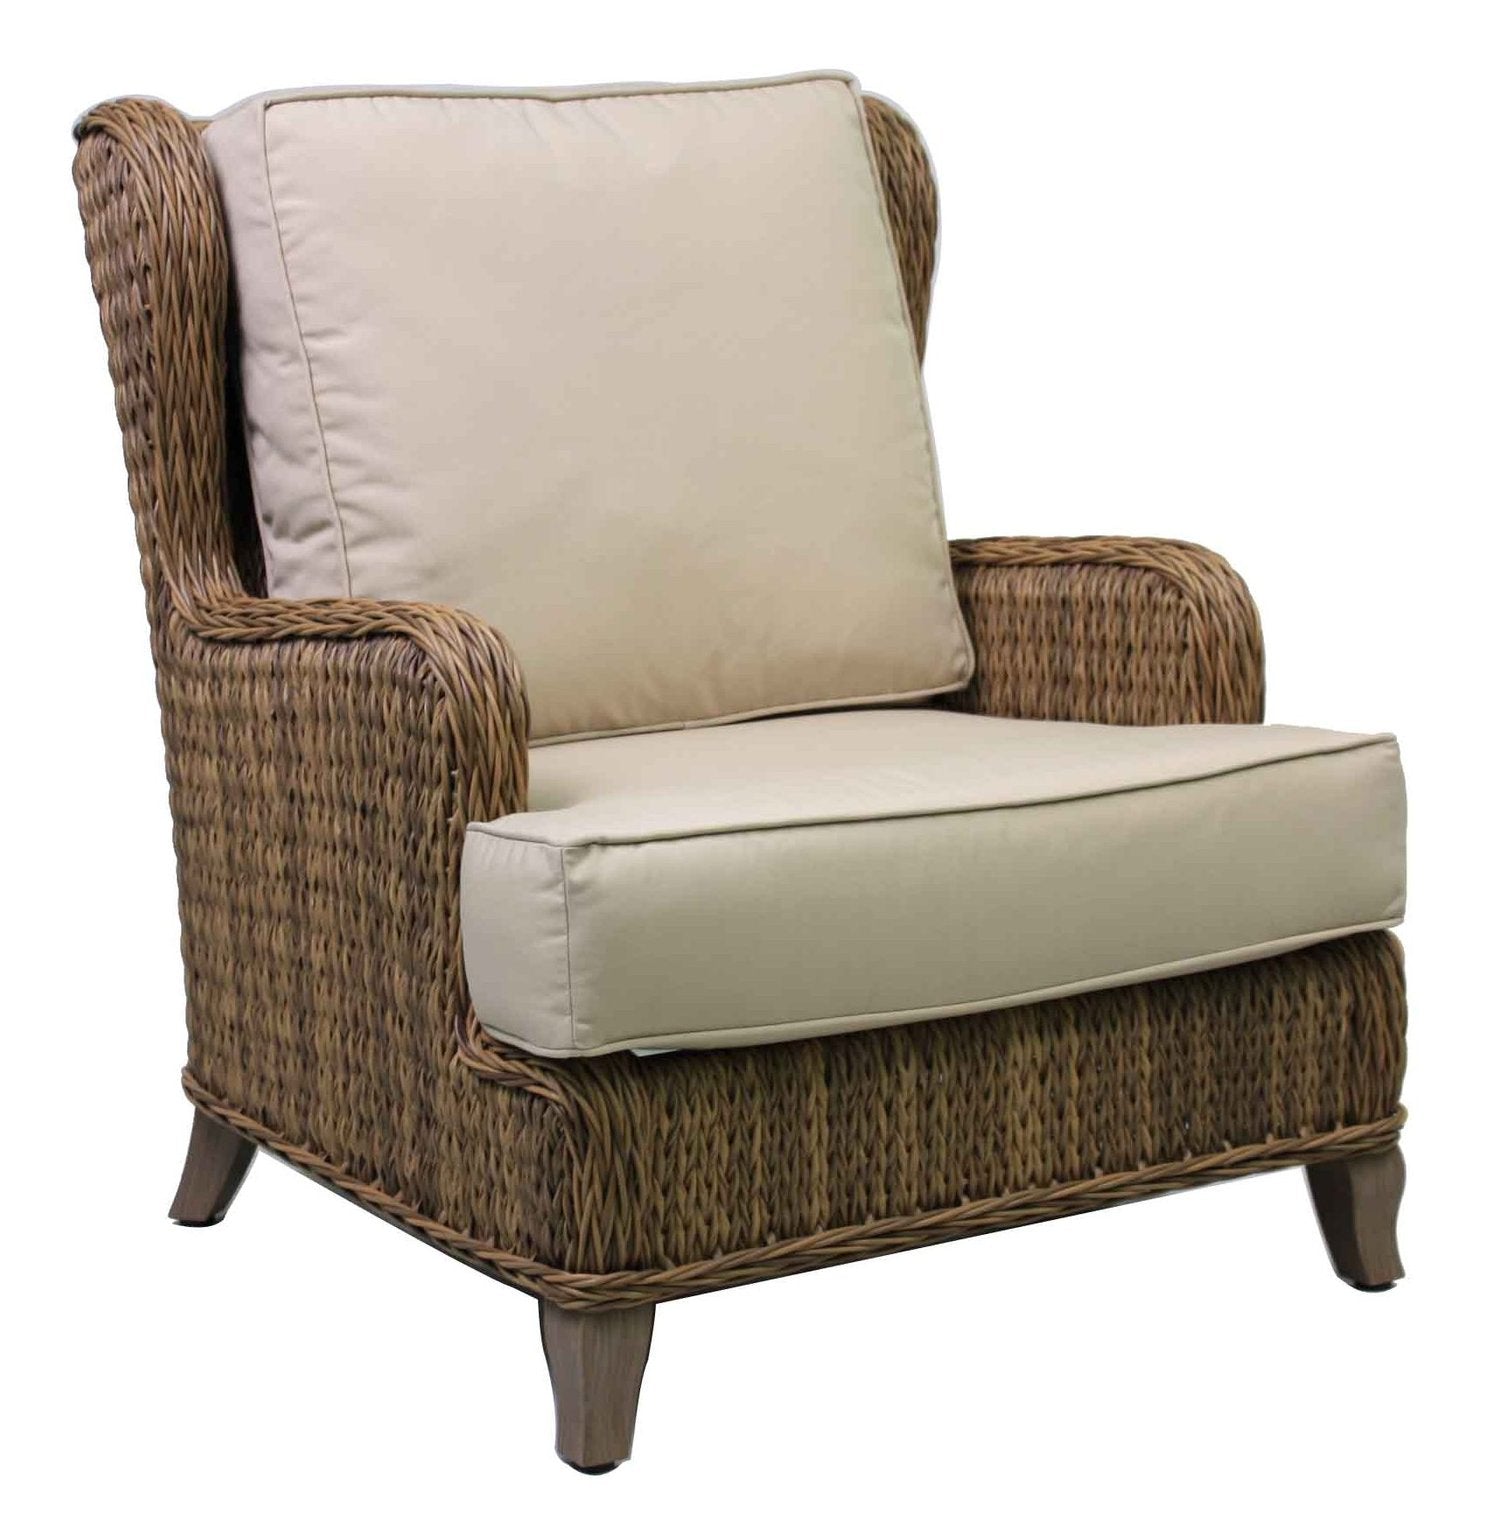 Monticello Wing Back Lounge Chair By Patio Renaissance